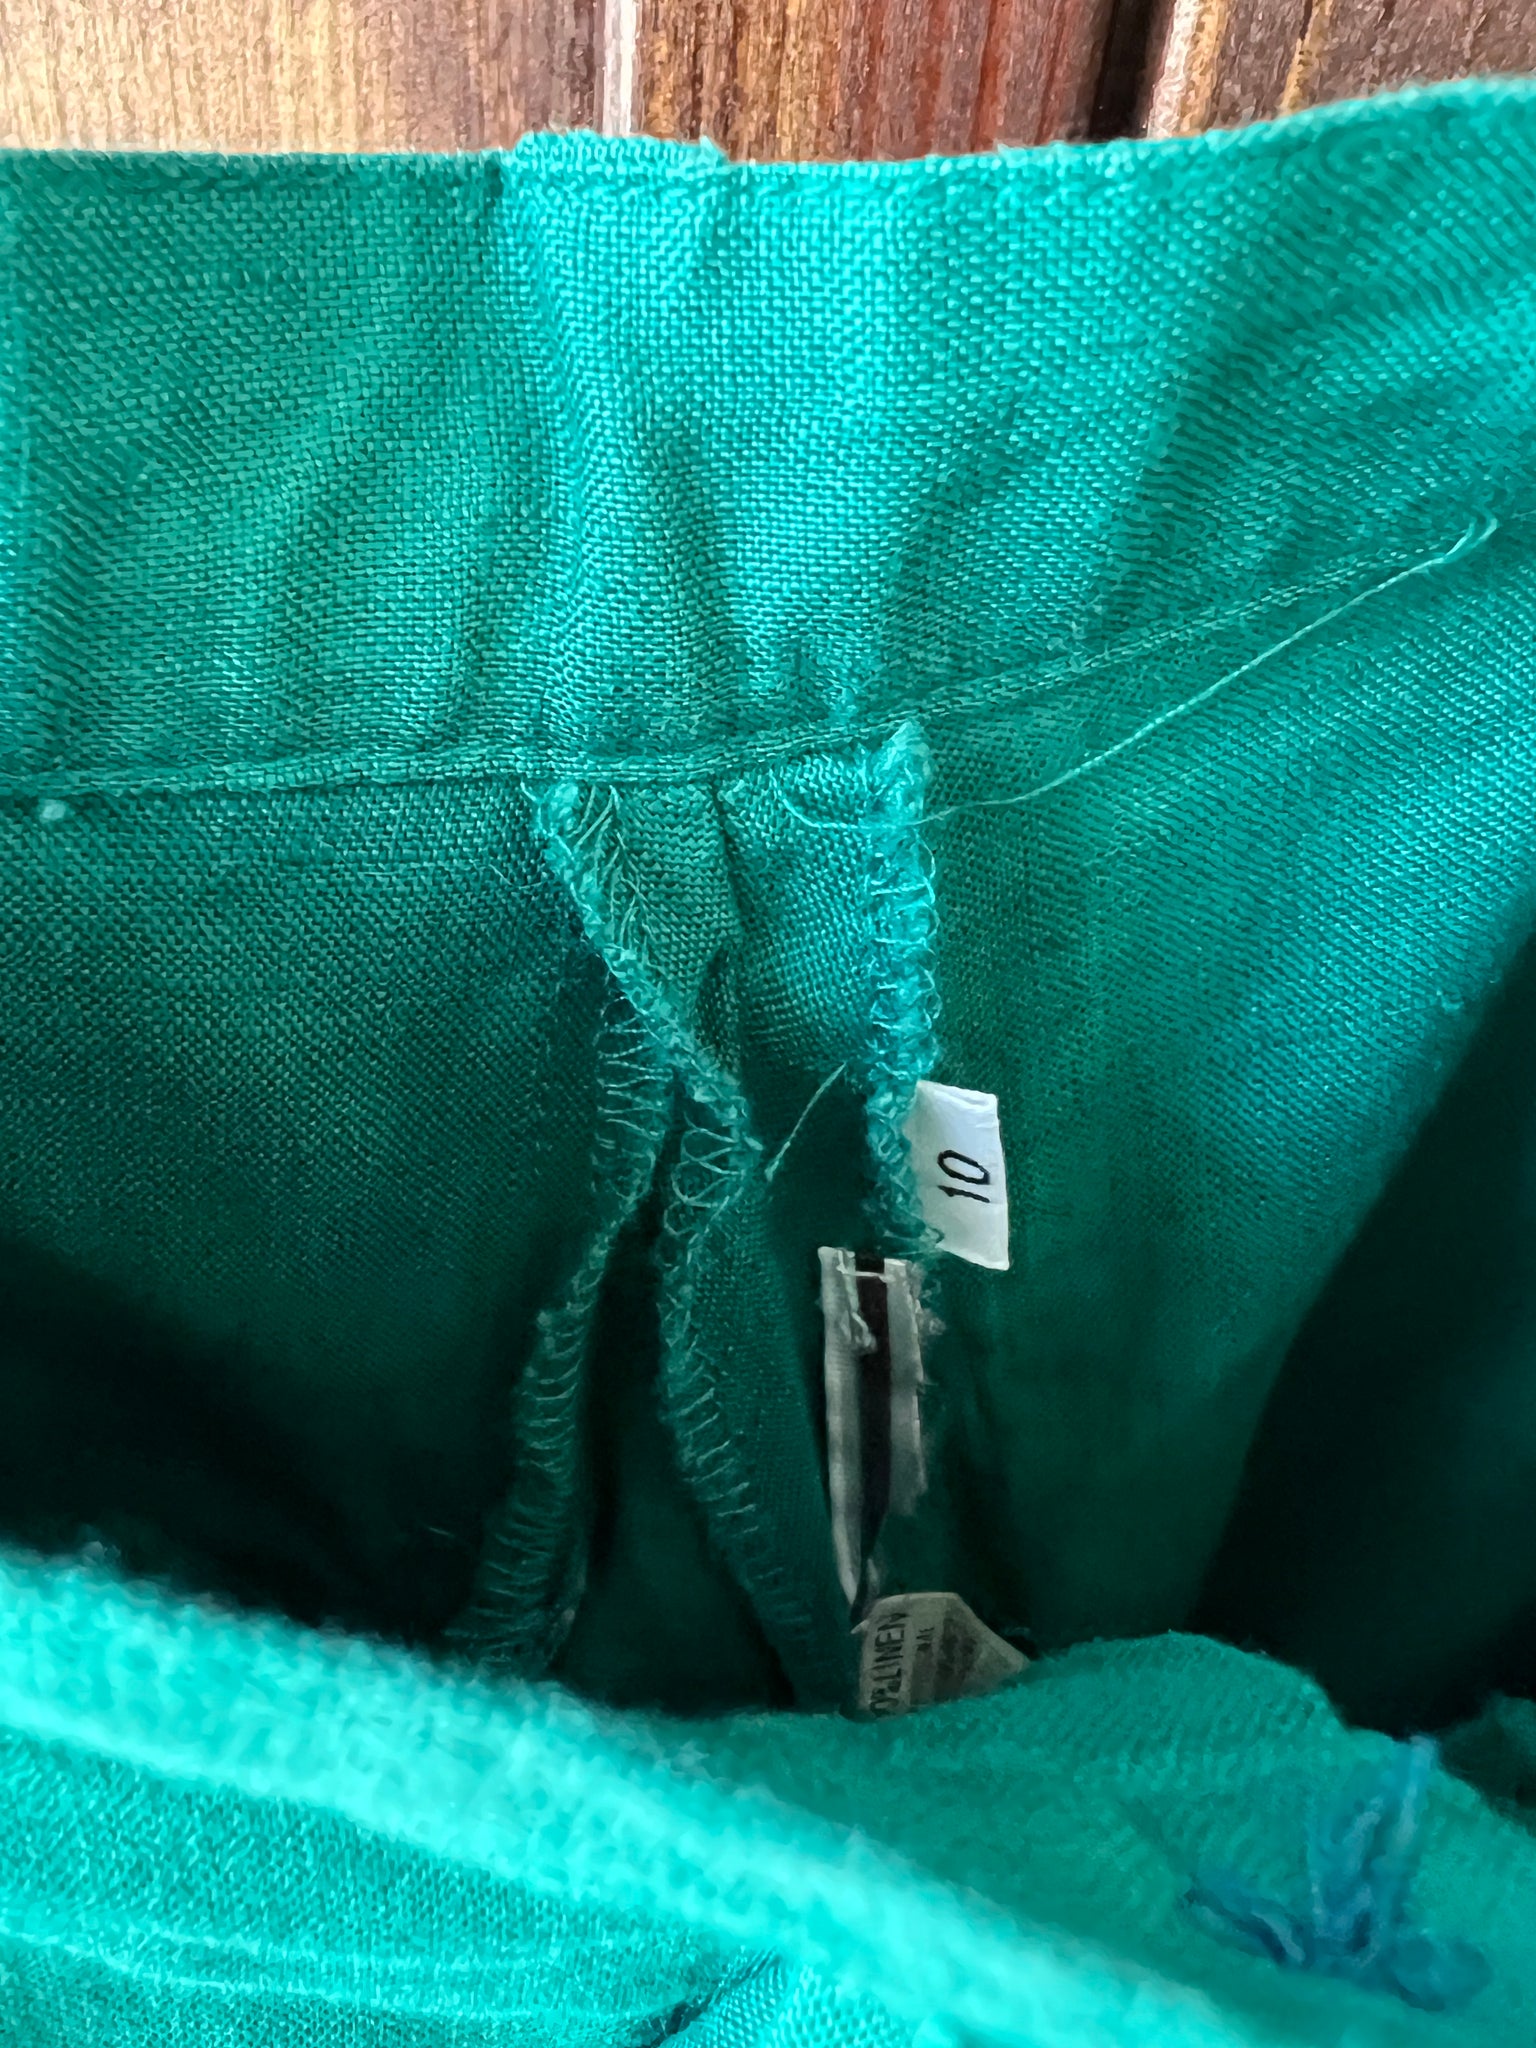 1990s PANTS- teal green linen pleated